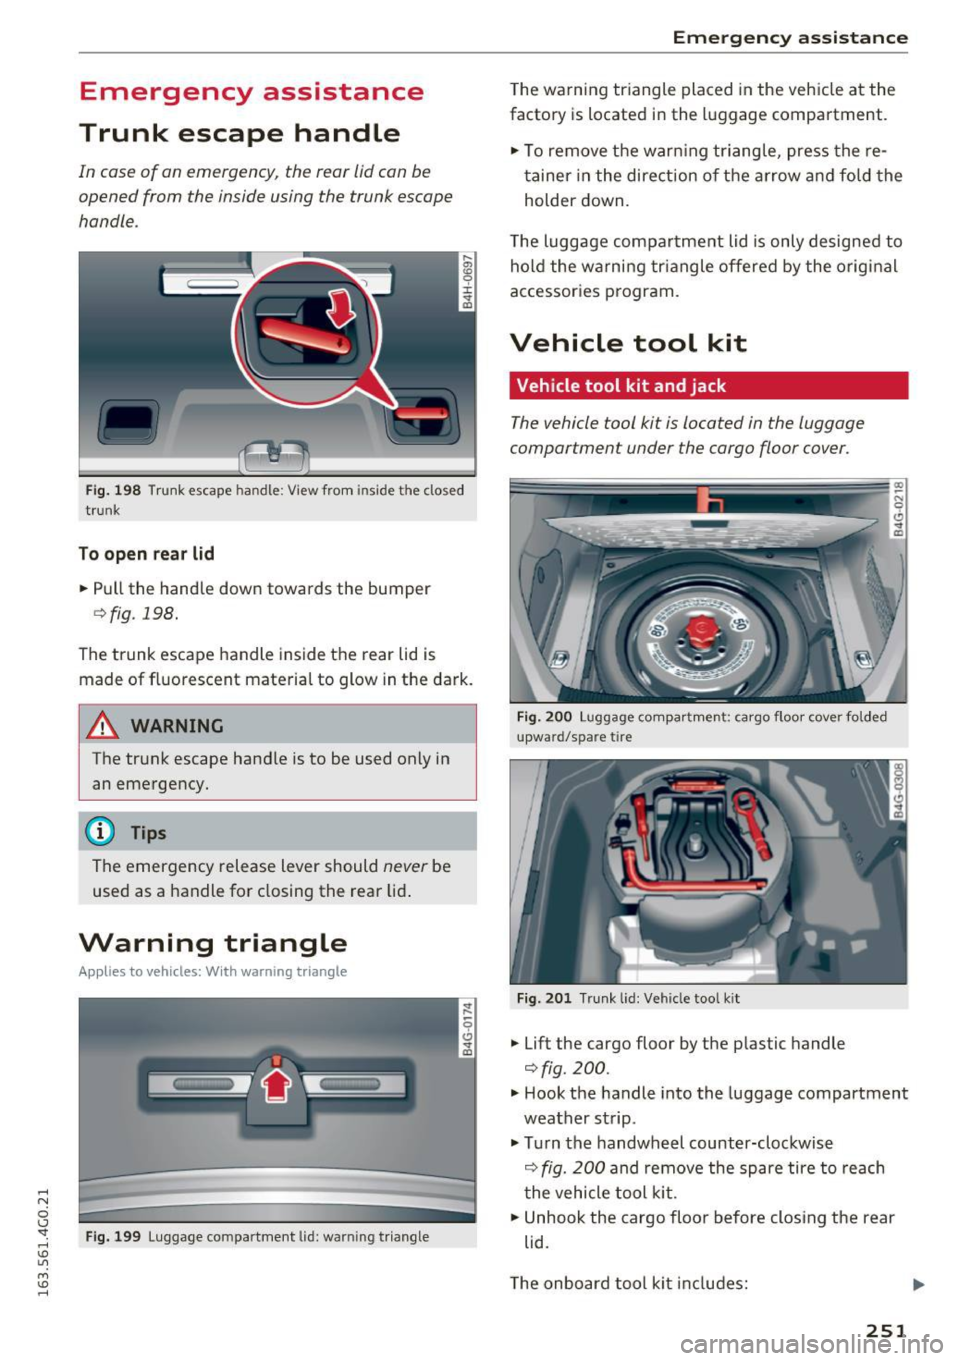 AUDI S6 2016  Owners Manual .... N 
0 CJ <I: .... I.Cl U"I 
M I.Cl ...... 
Emergency  assistance 
Trunk  escape  handle 
In  case of  an  emergency,  the  rear  lid  can be 
opened  from  the  inside  using  the  trunk  escape 